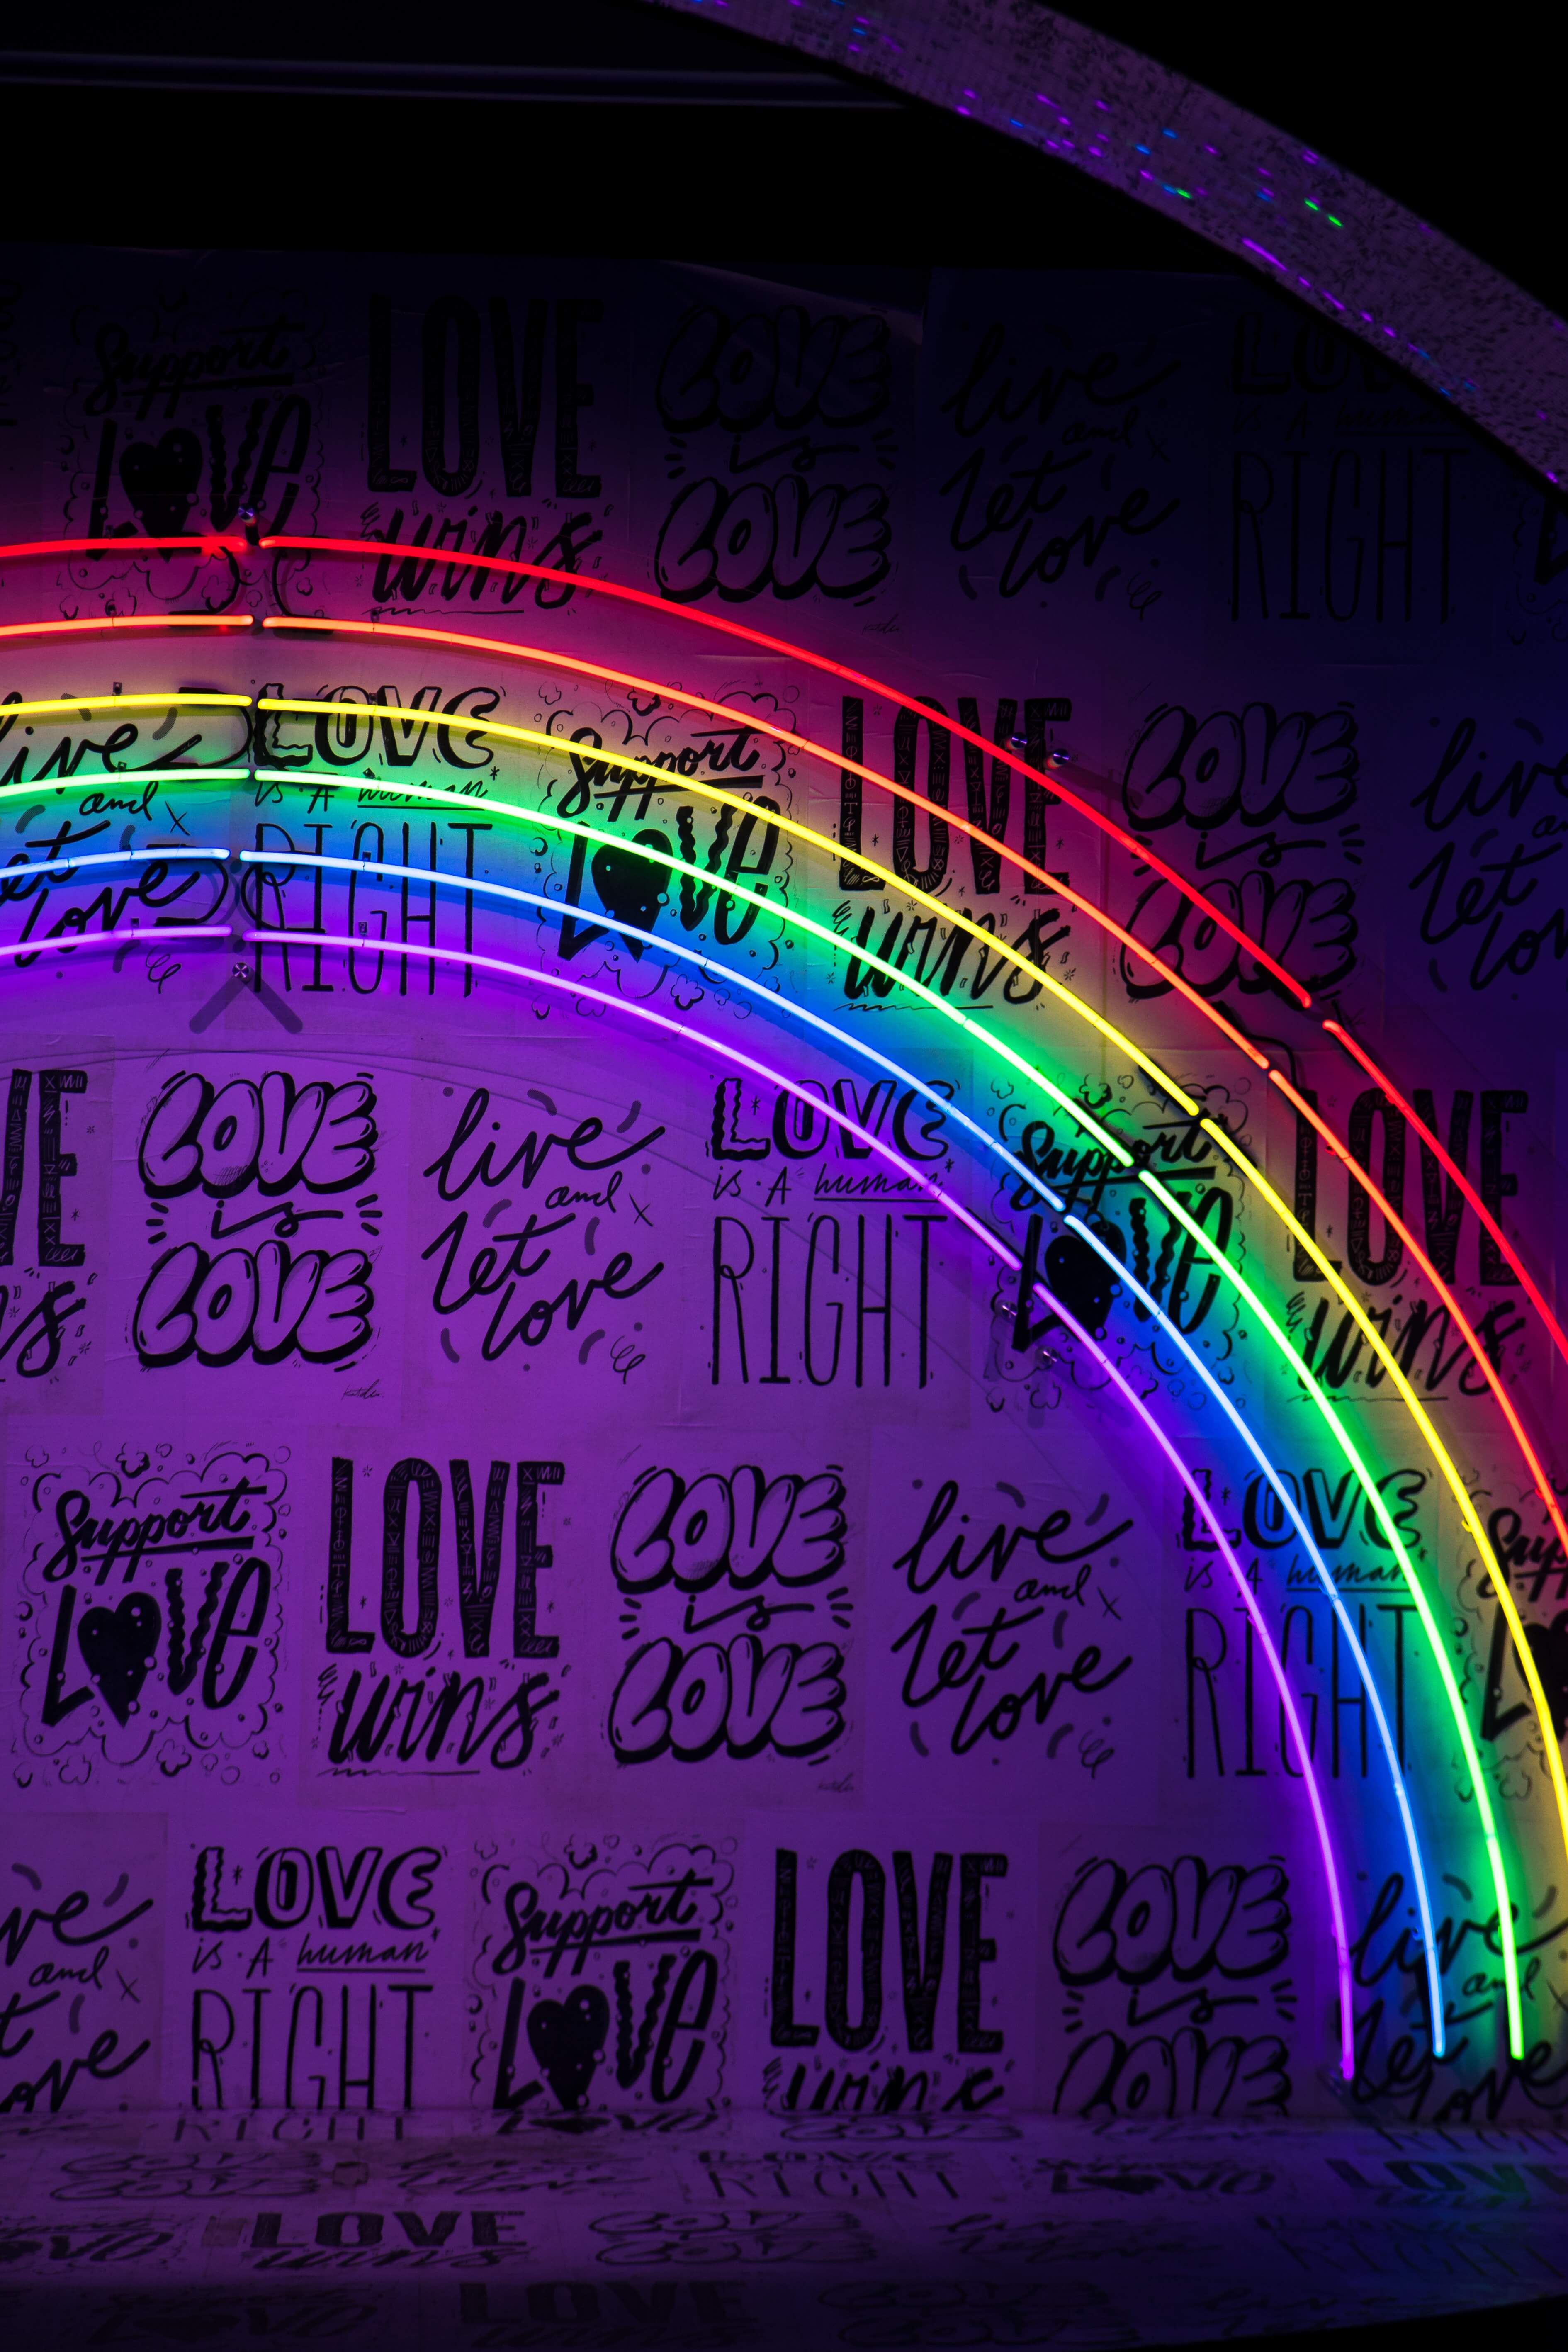 Rainbow ligtning covering a poster with different lgbtq quotes